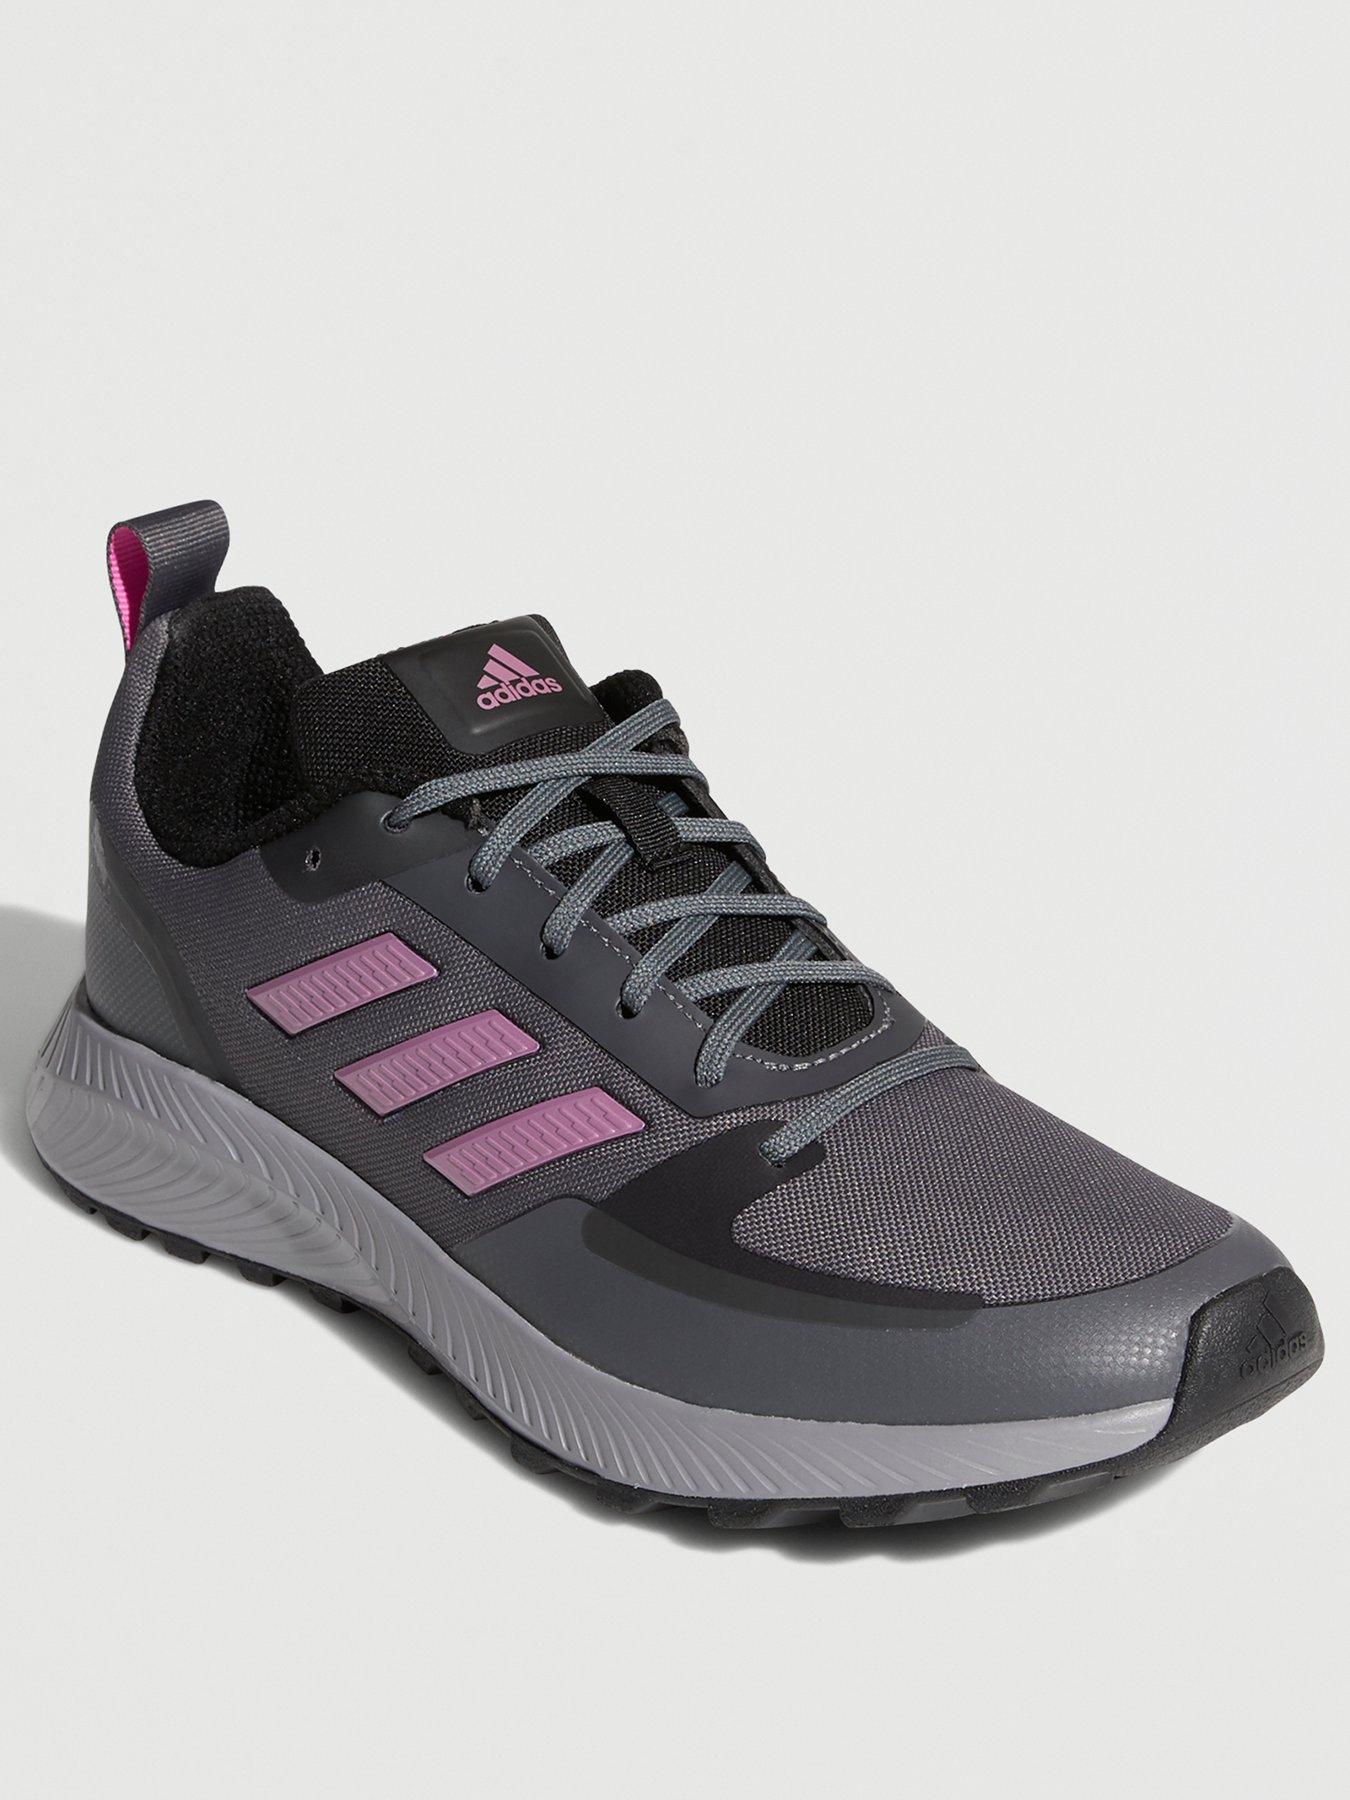 adidas trainers size 5 womens